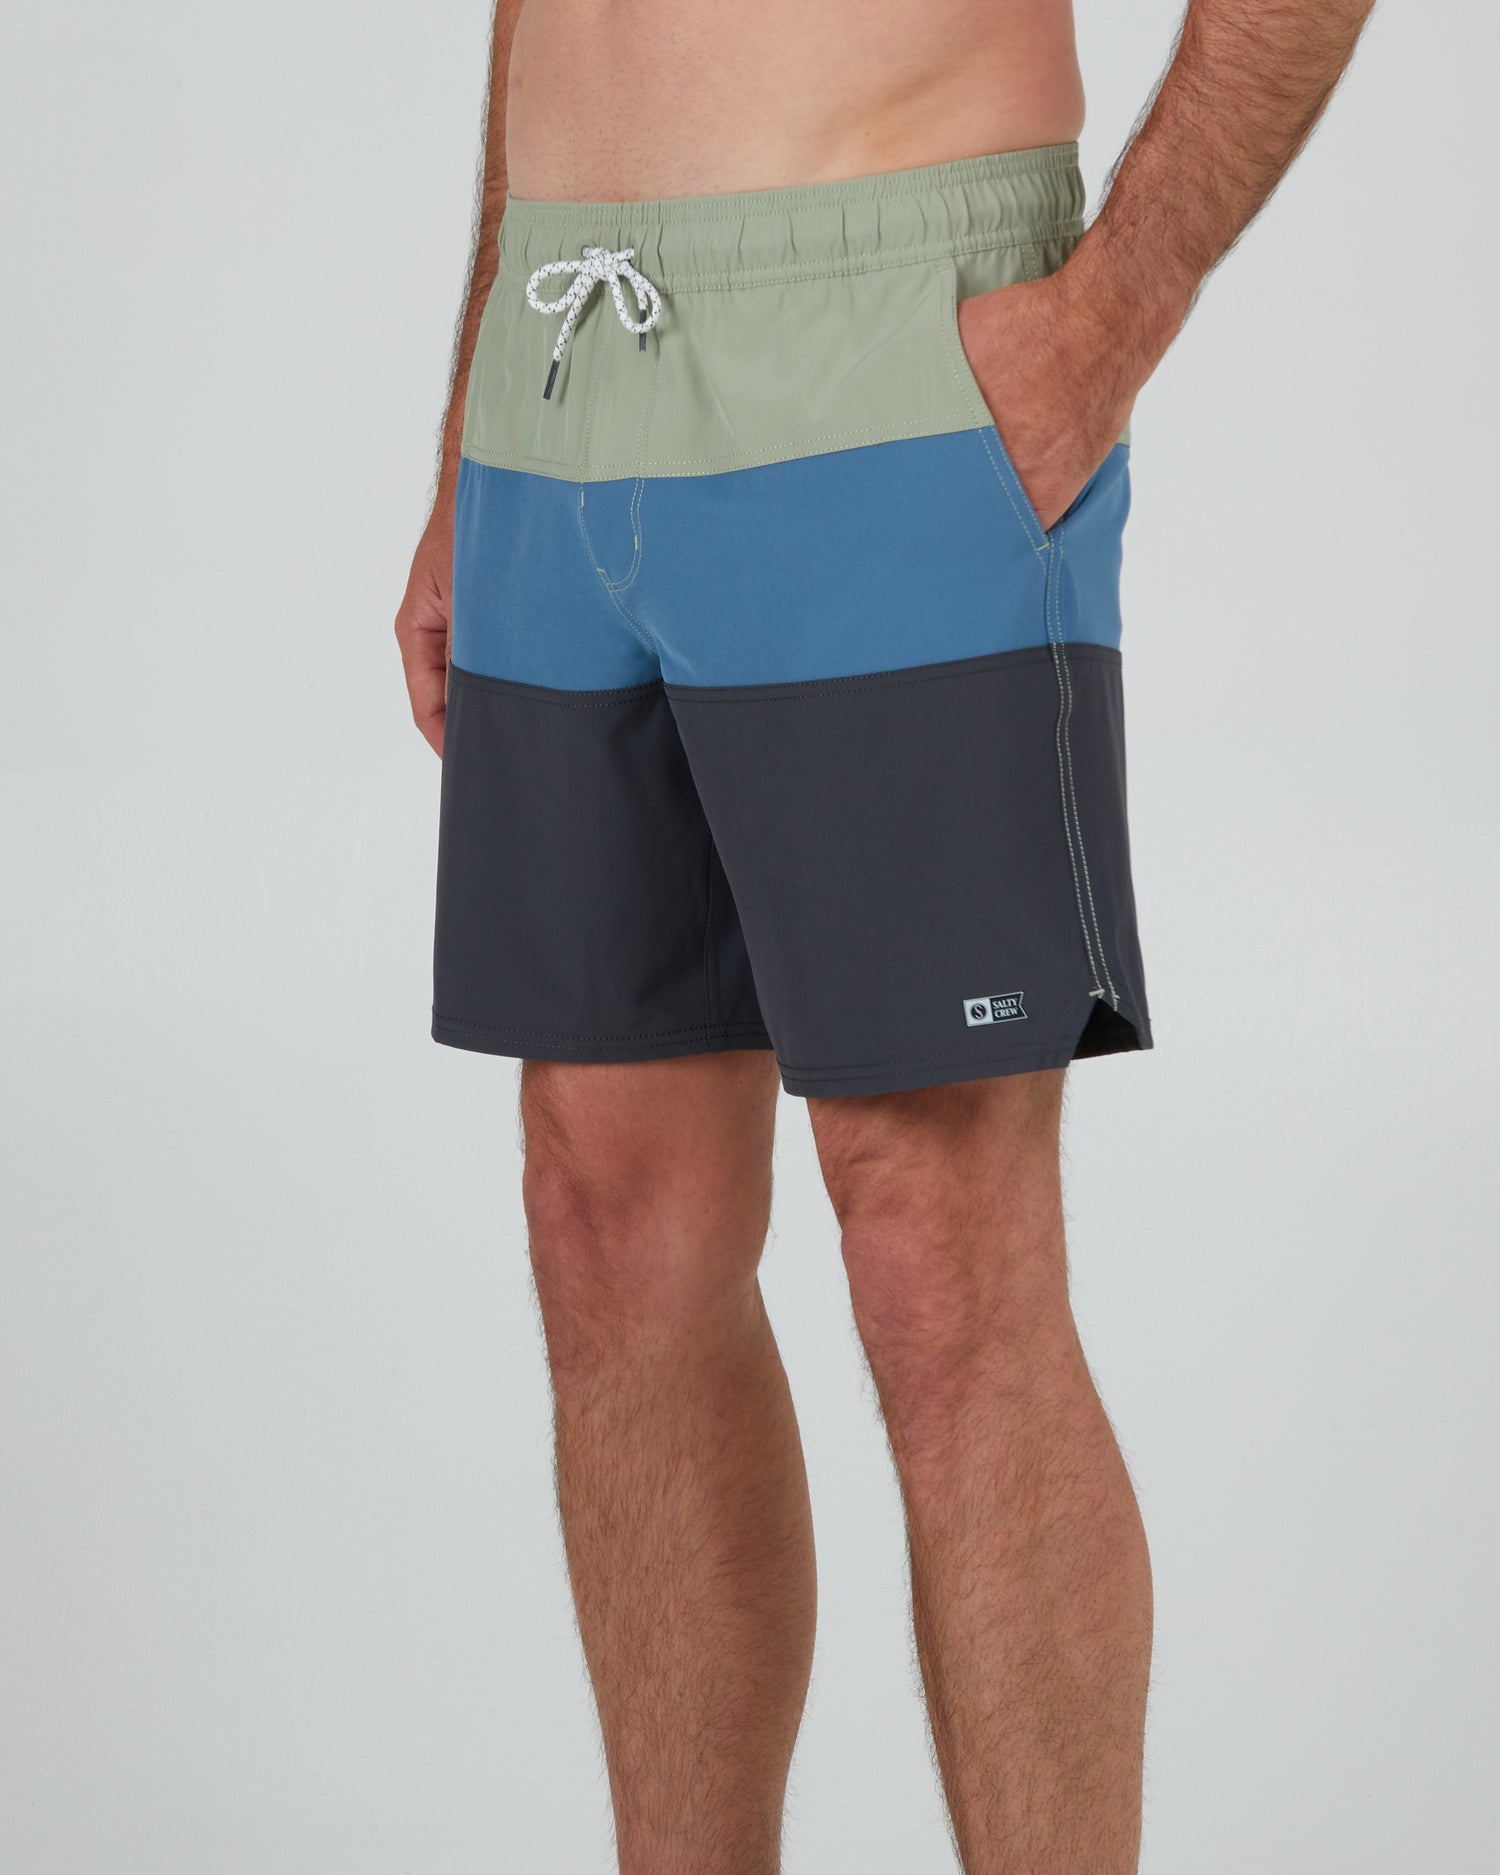 front angled view of Beacons 2 Dusty Sage Elastic Boardshort